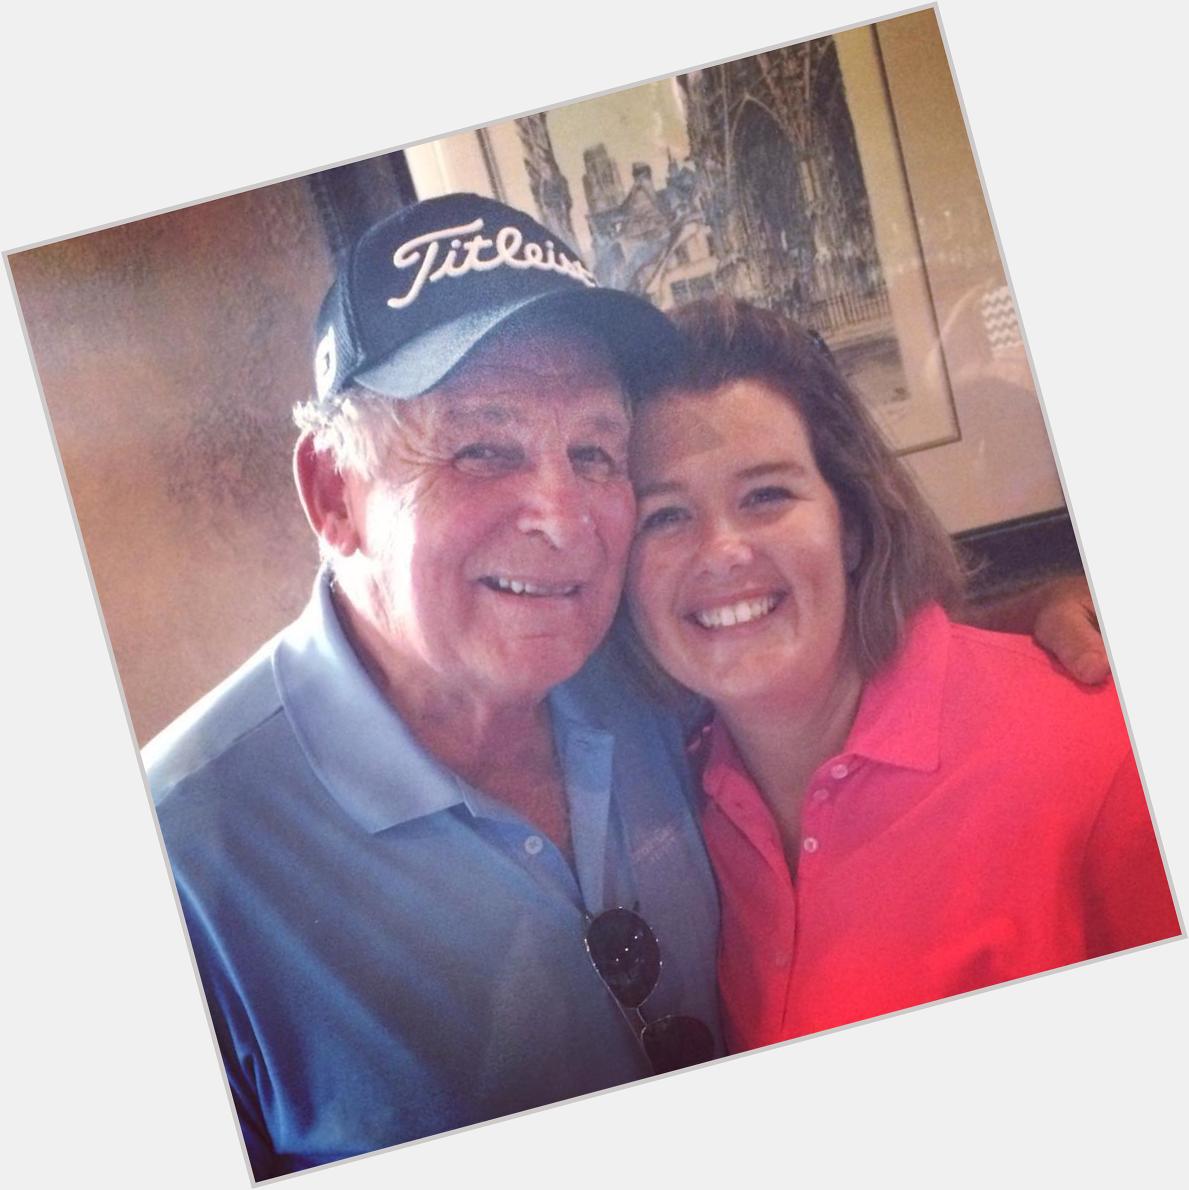 Happy birthday to Bobby Cox! The sweetest legend ever! 